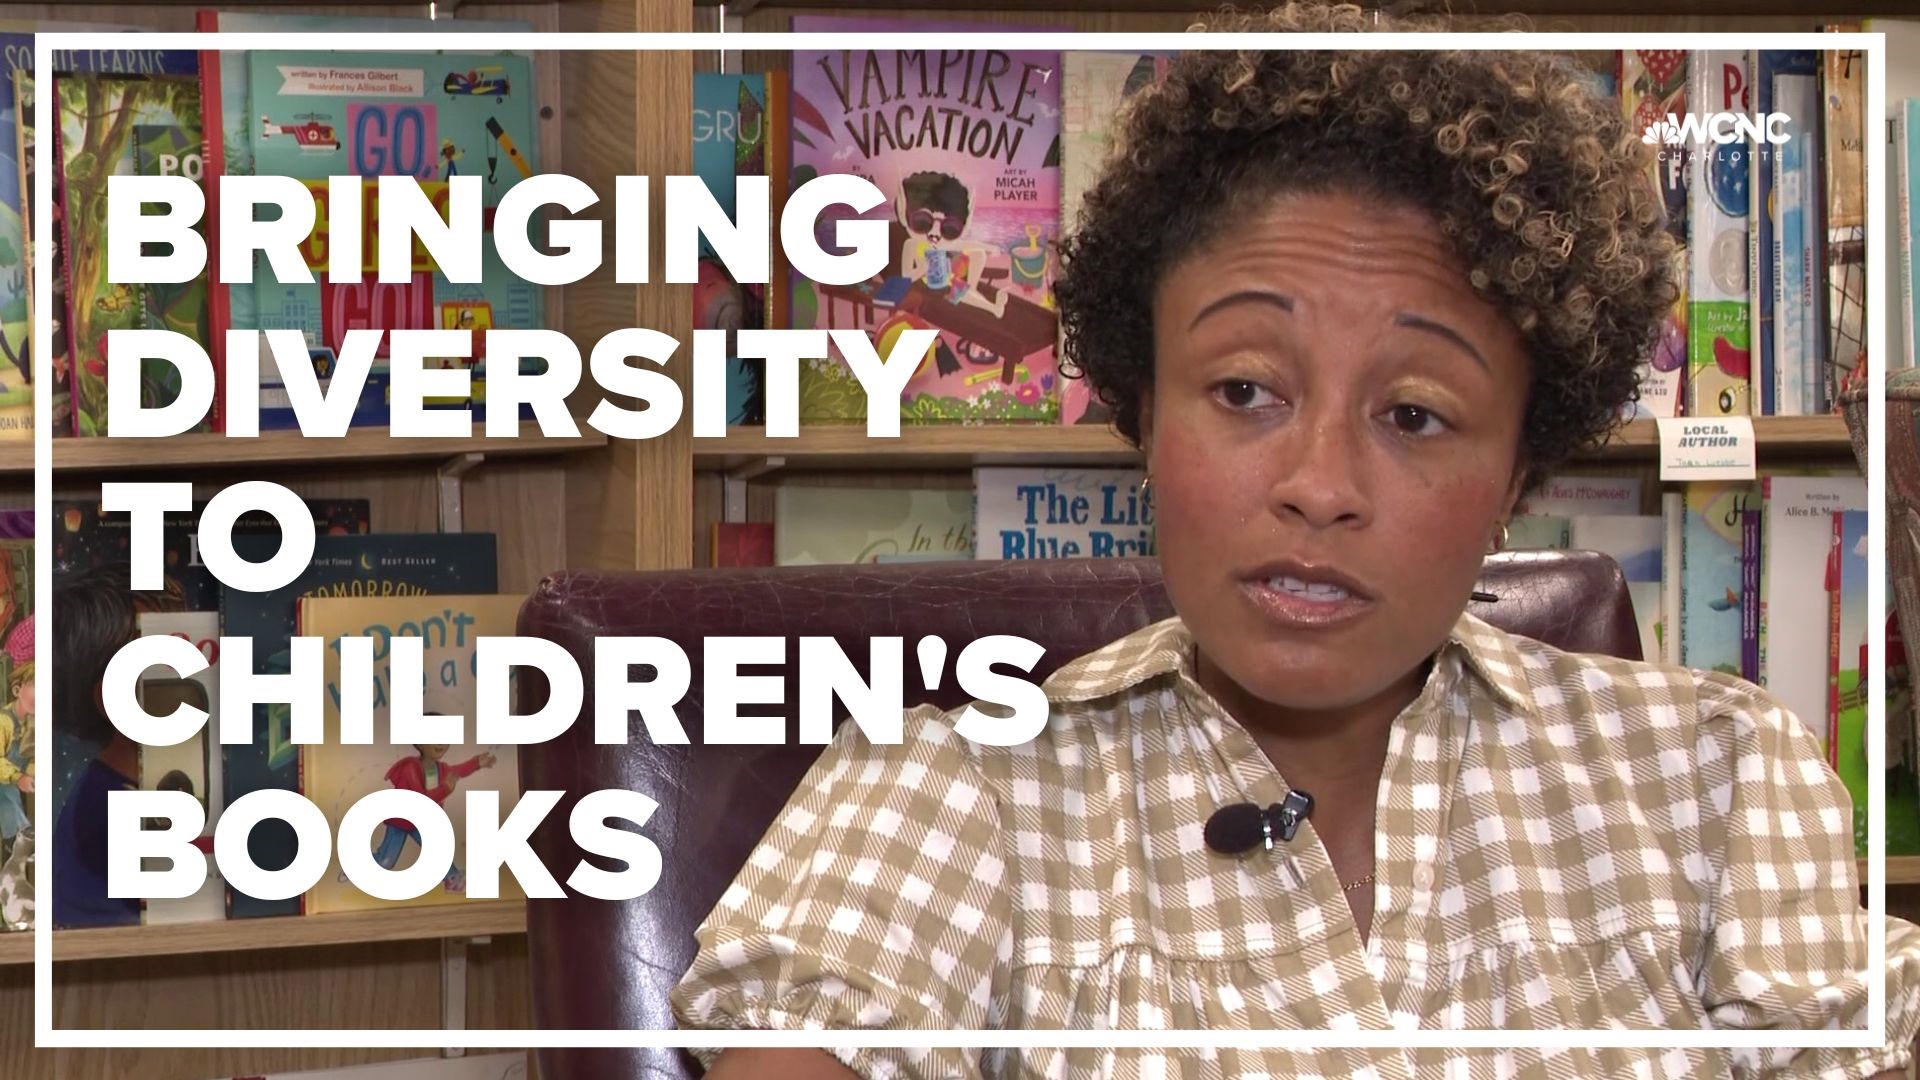 Dorothy Price is launching a new series of children's books with the goal of teaching kids the power of diversity through literature.